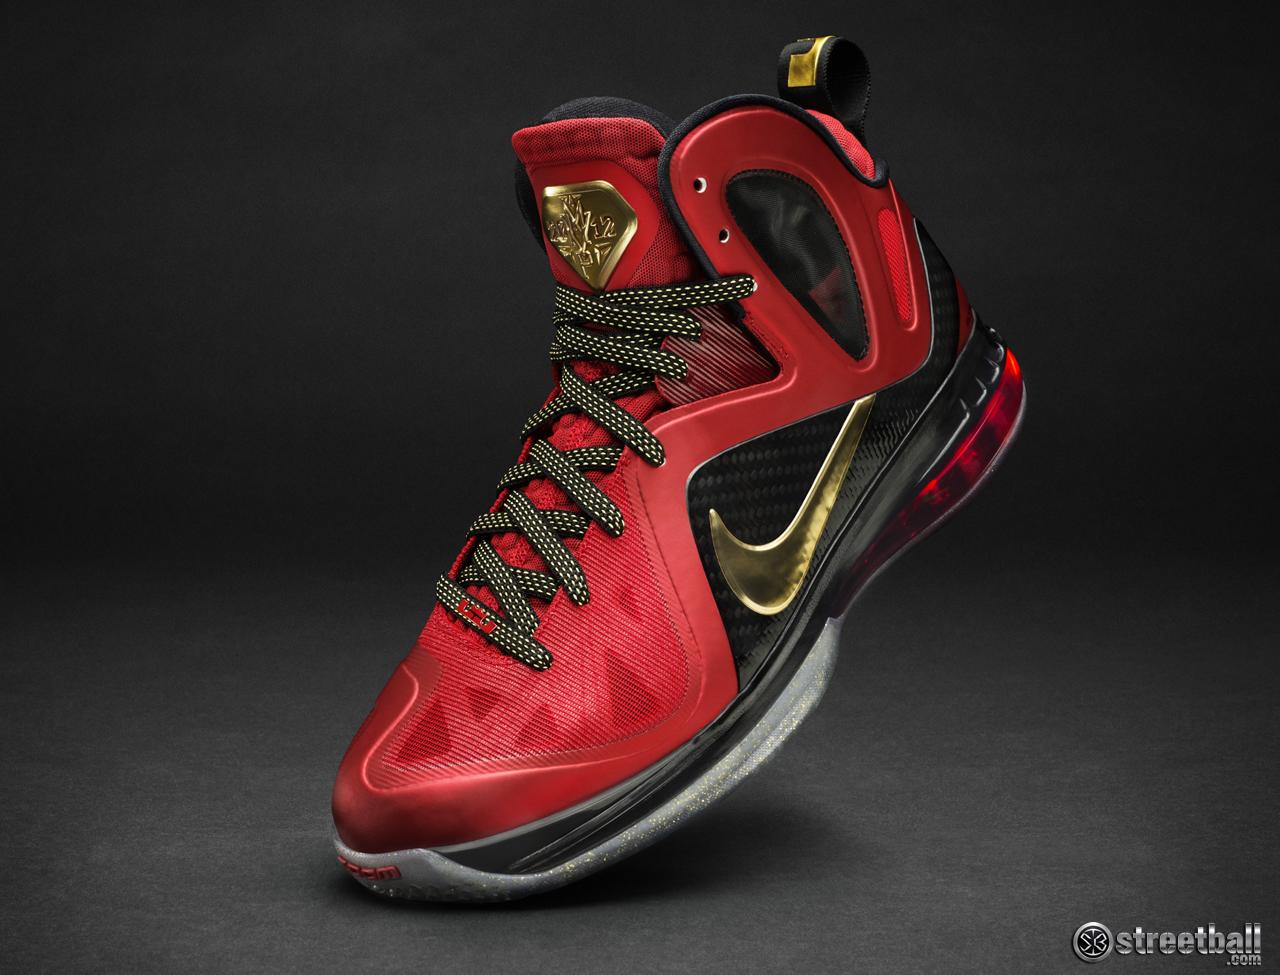 Sample Lebron James Shoes Wallpaper White Red Classic - Lebron James Shoes , HD Wallpaper & Backgrounds